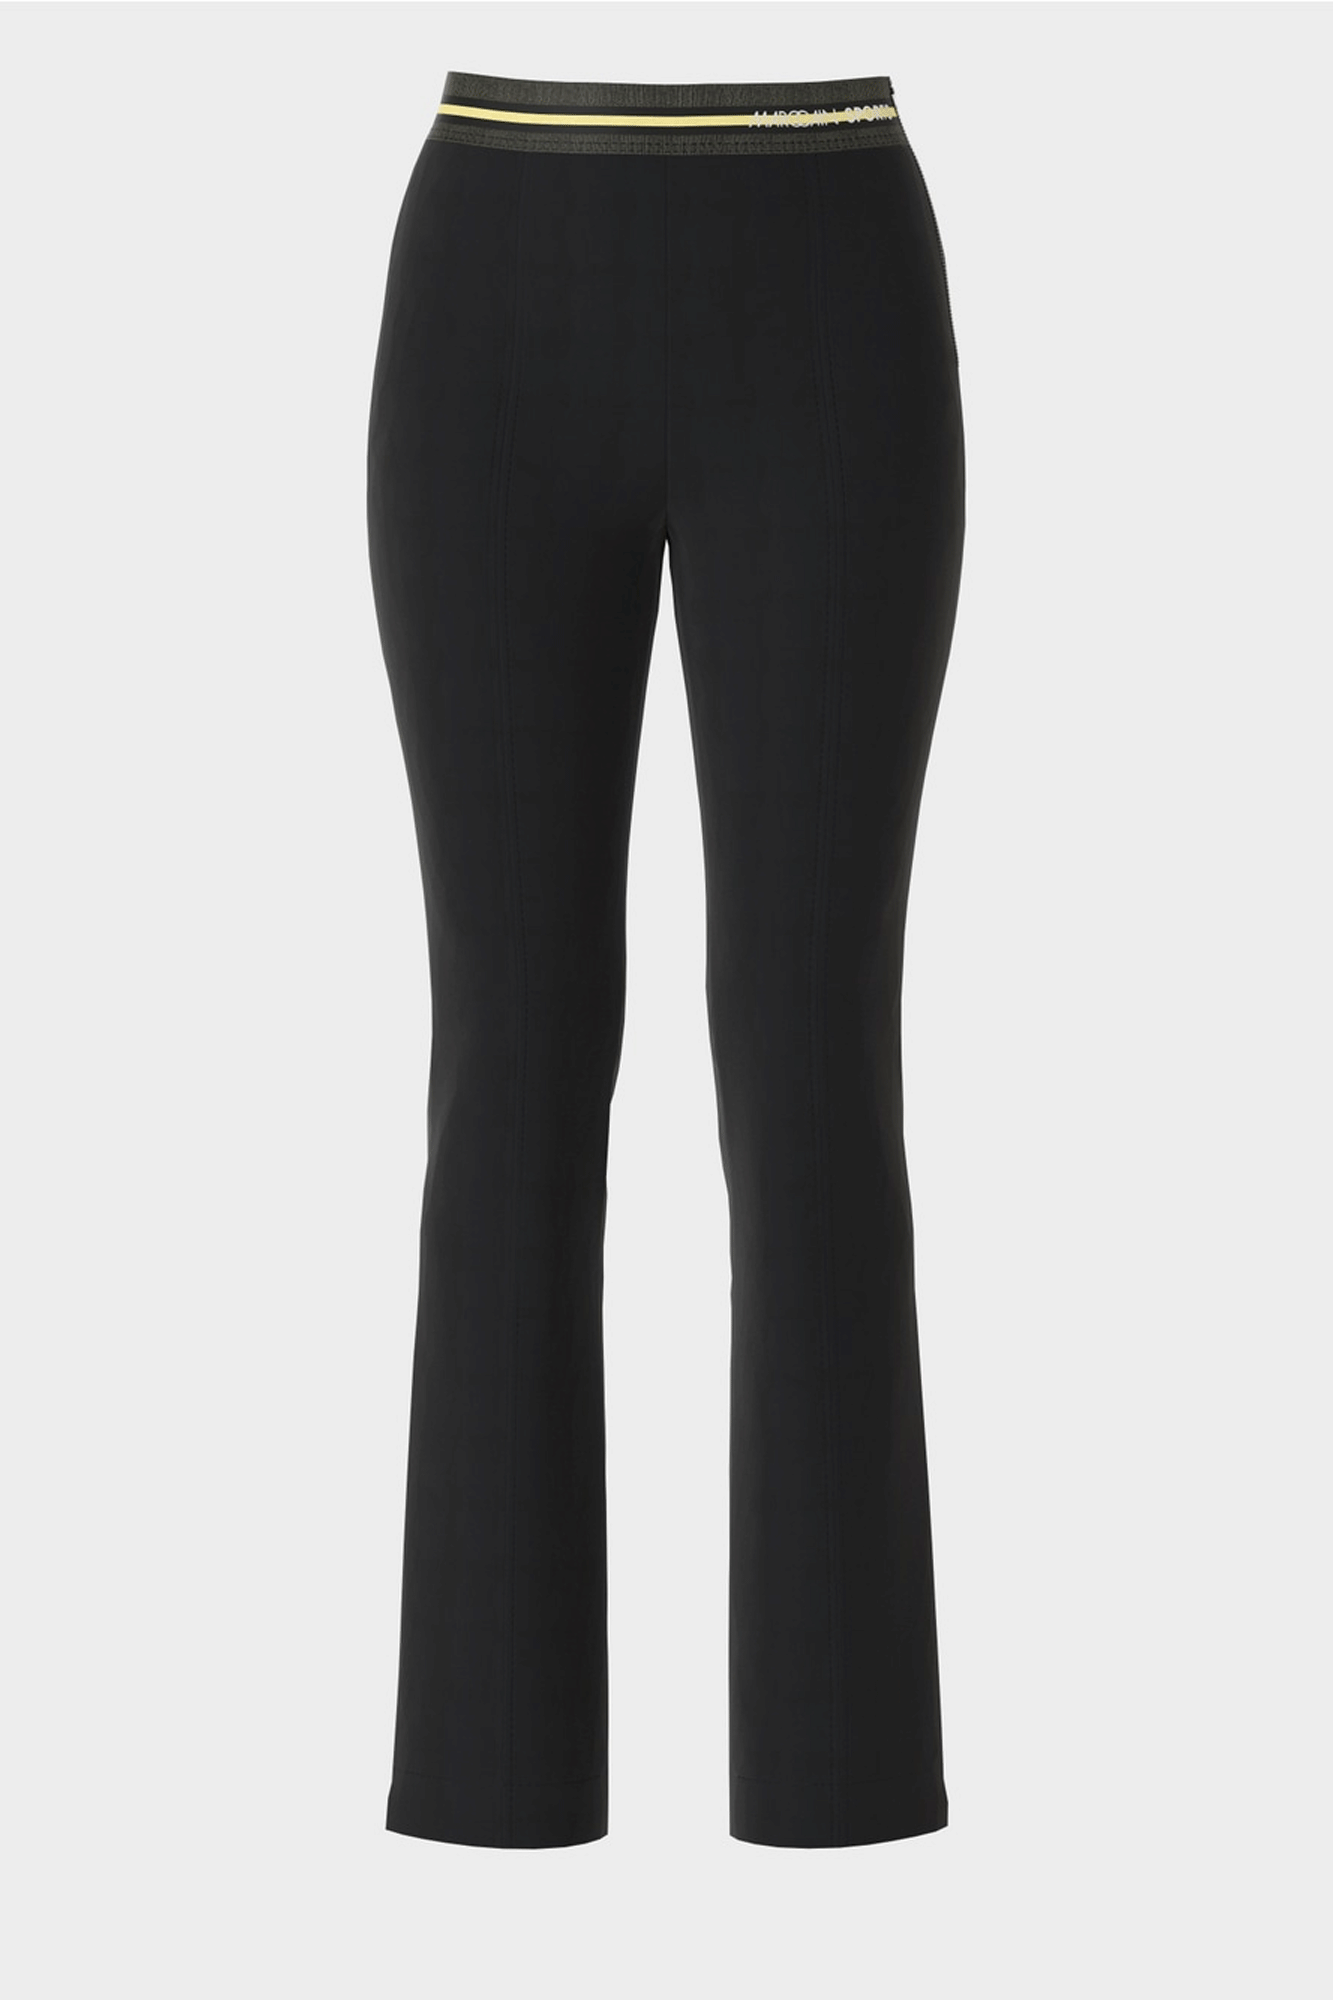 The Slim Fit Snaky Stars Pants feature a high-waist elasticated waistband and glittering lurex stripes for a sporty look. Tailored in a slim fit silhouette, the pants are finished with side slits, a zip closure, and decorative stitching. Feel chic and confident in these stylish pants.